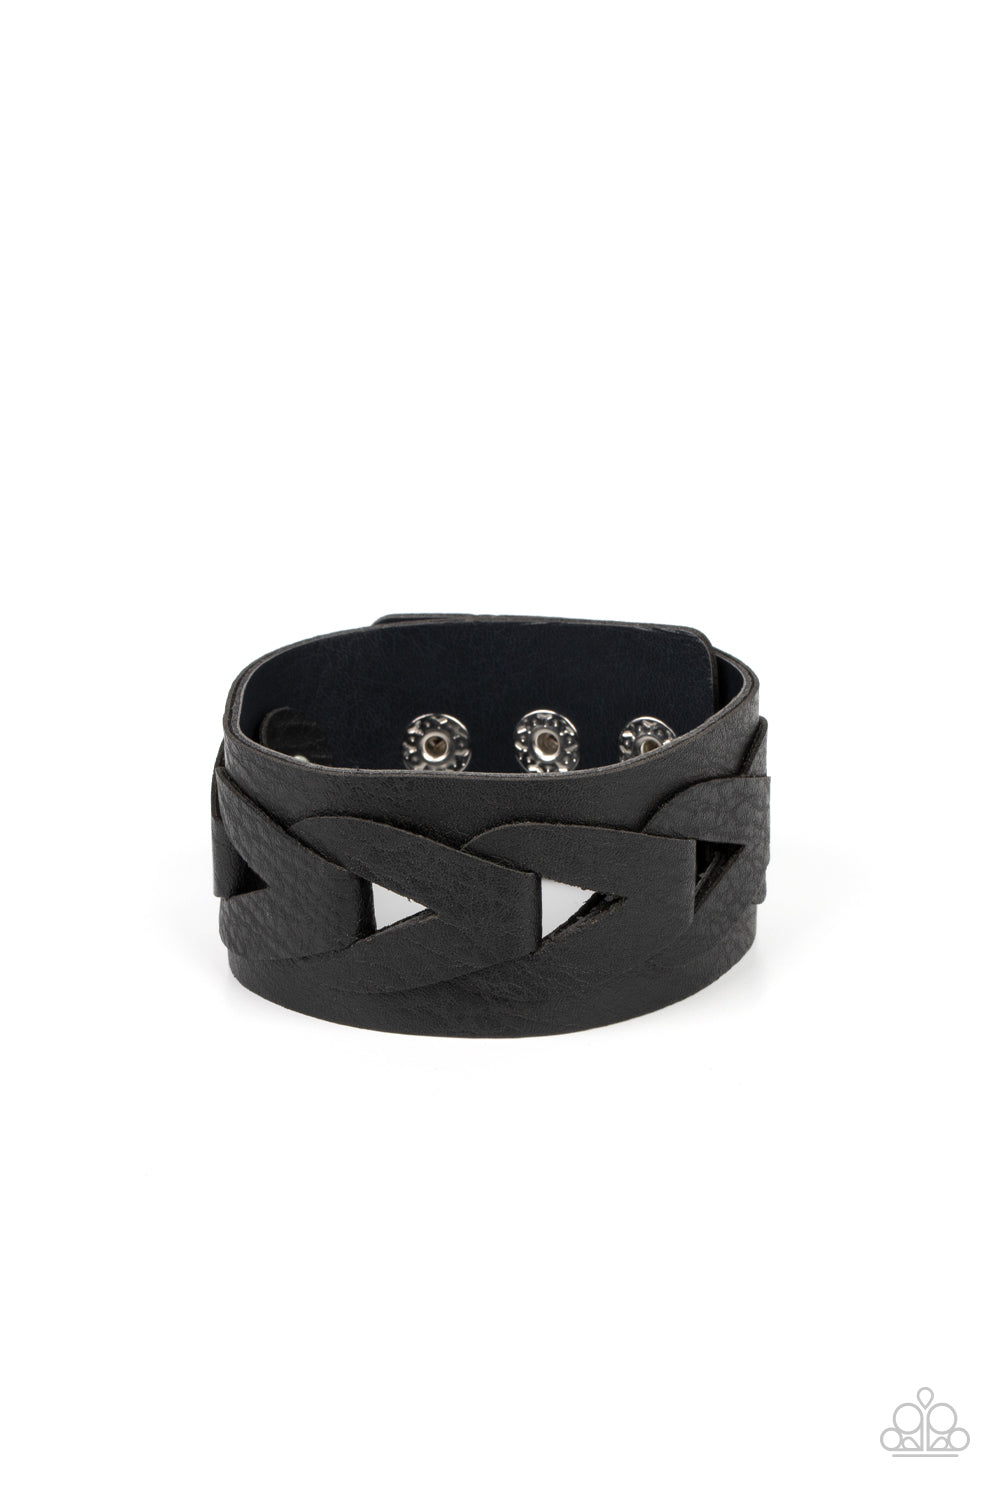 Horse and Carriage - Black Bracelet